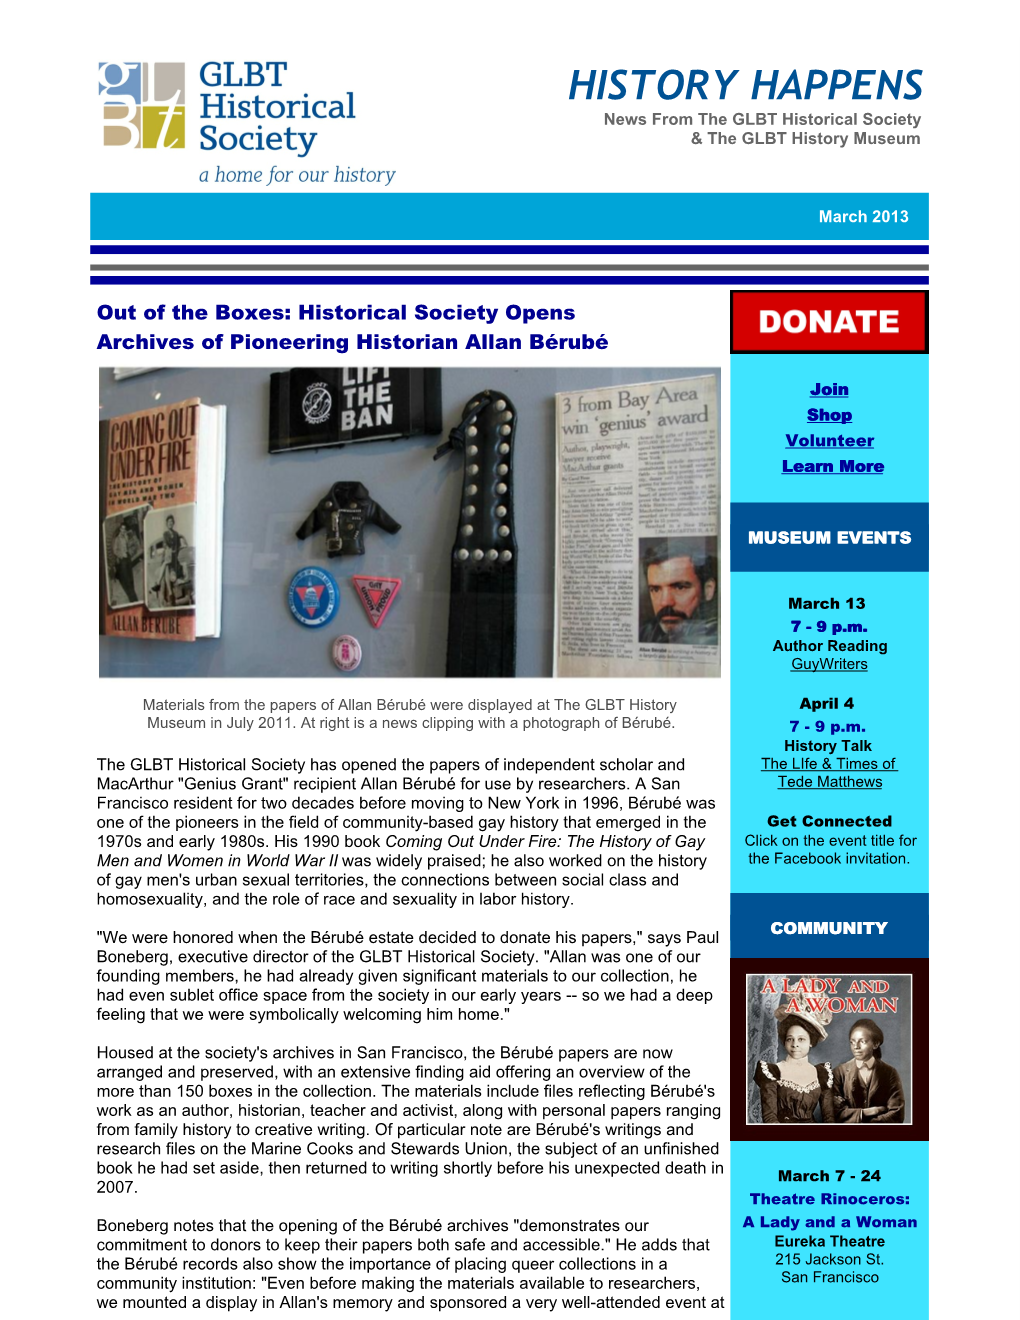 HISTORY HAPPENS News from the GLBT Historical Society & the GLBT History Museum